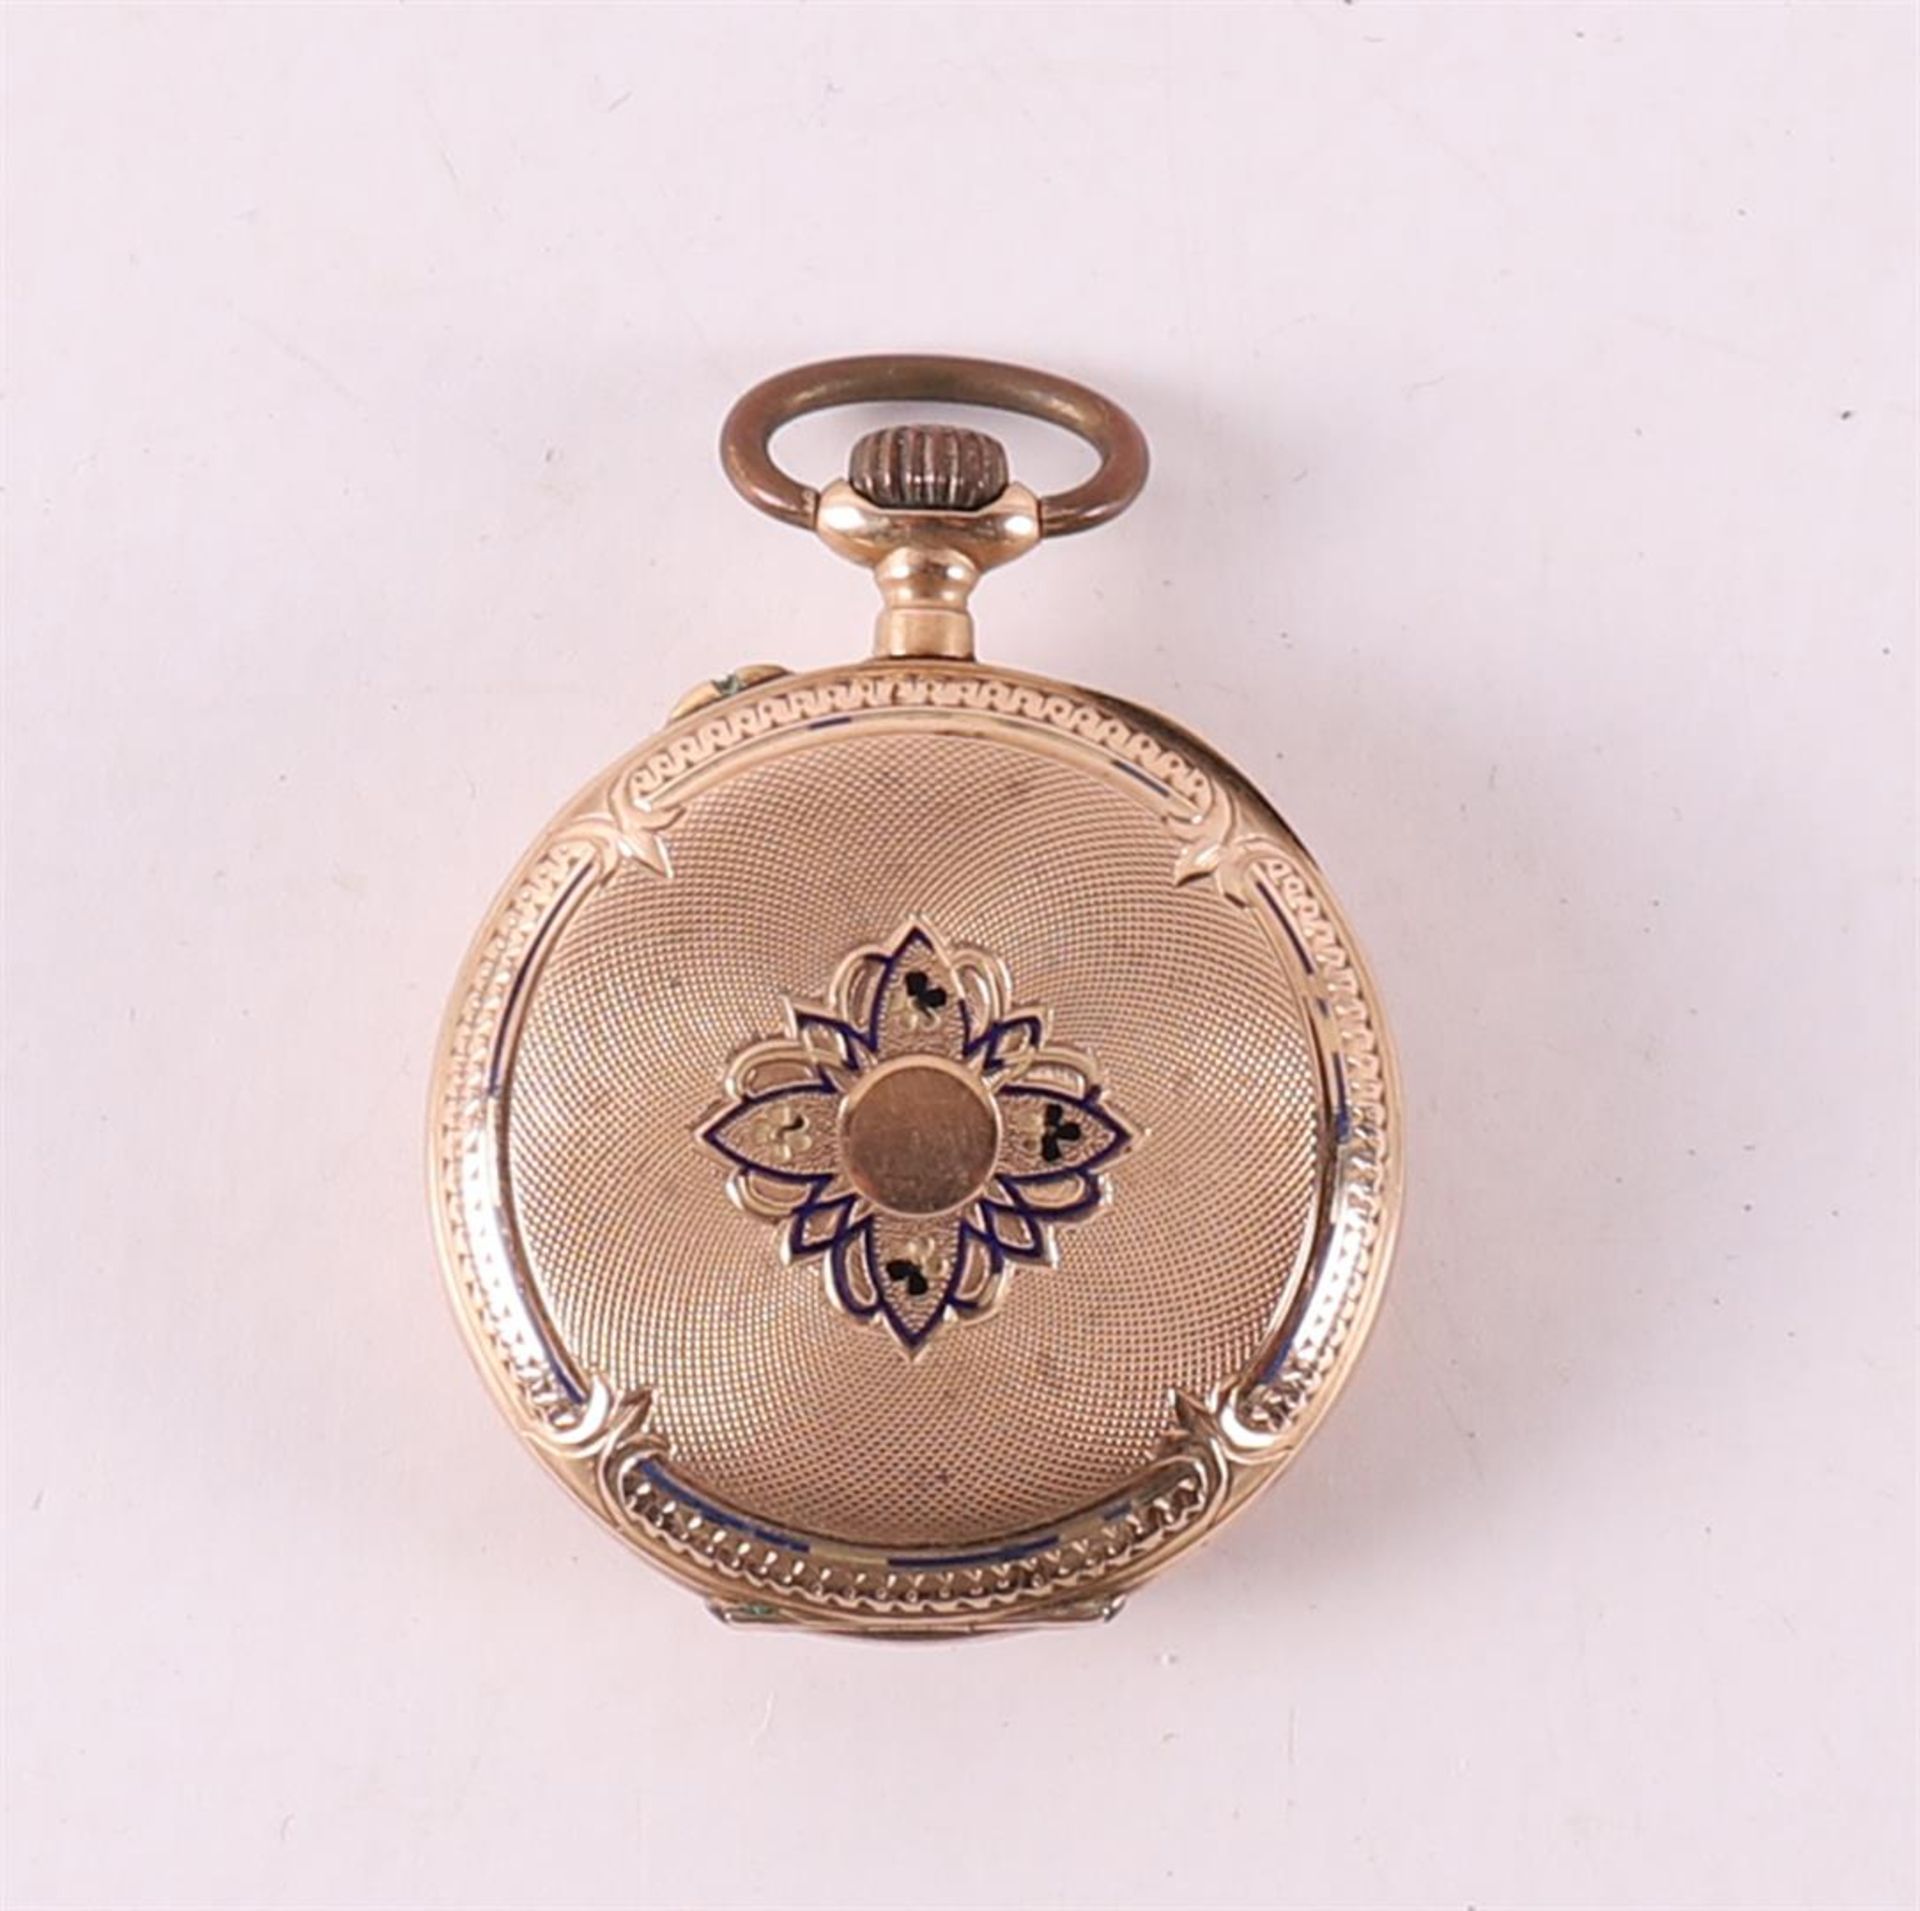 A ladies' pendant watch in 14 kt 585/1000 yellow gold case, circa 1900. - Image 2 of 3